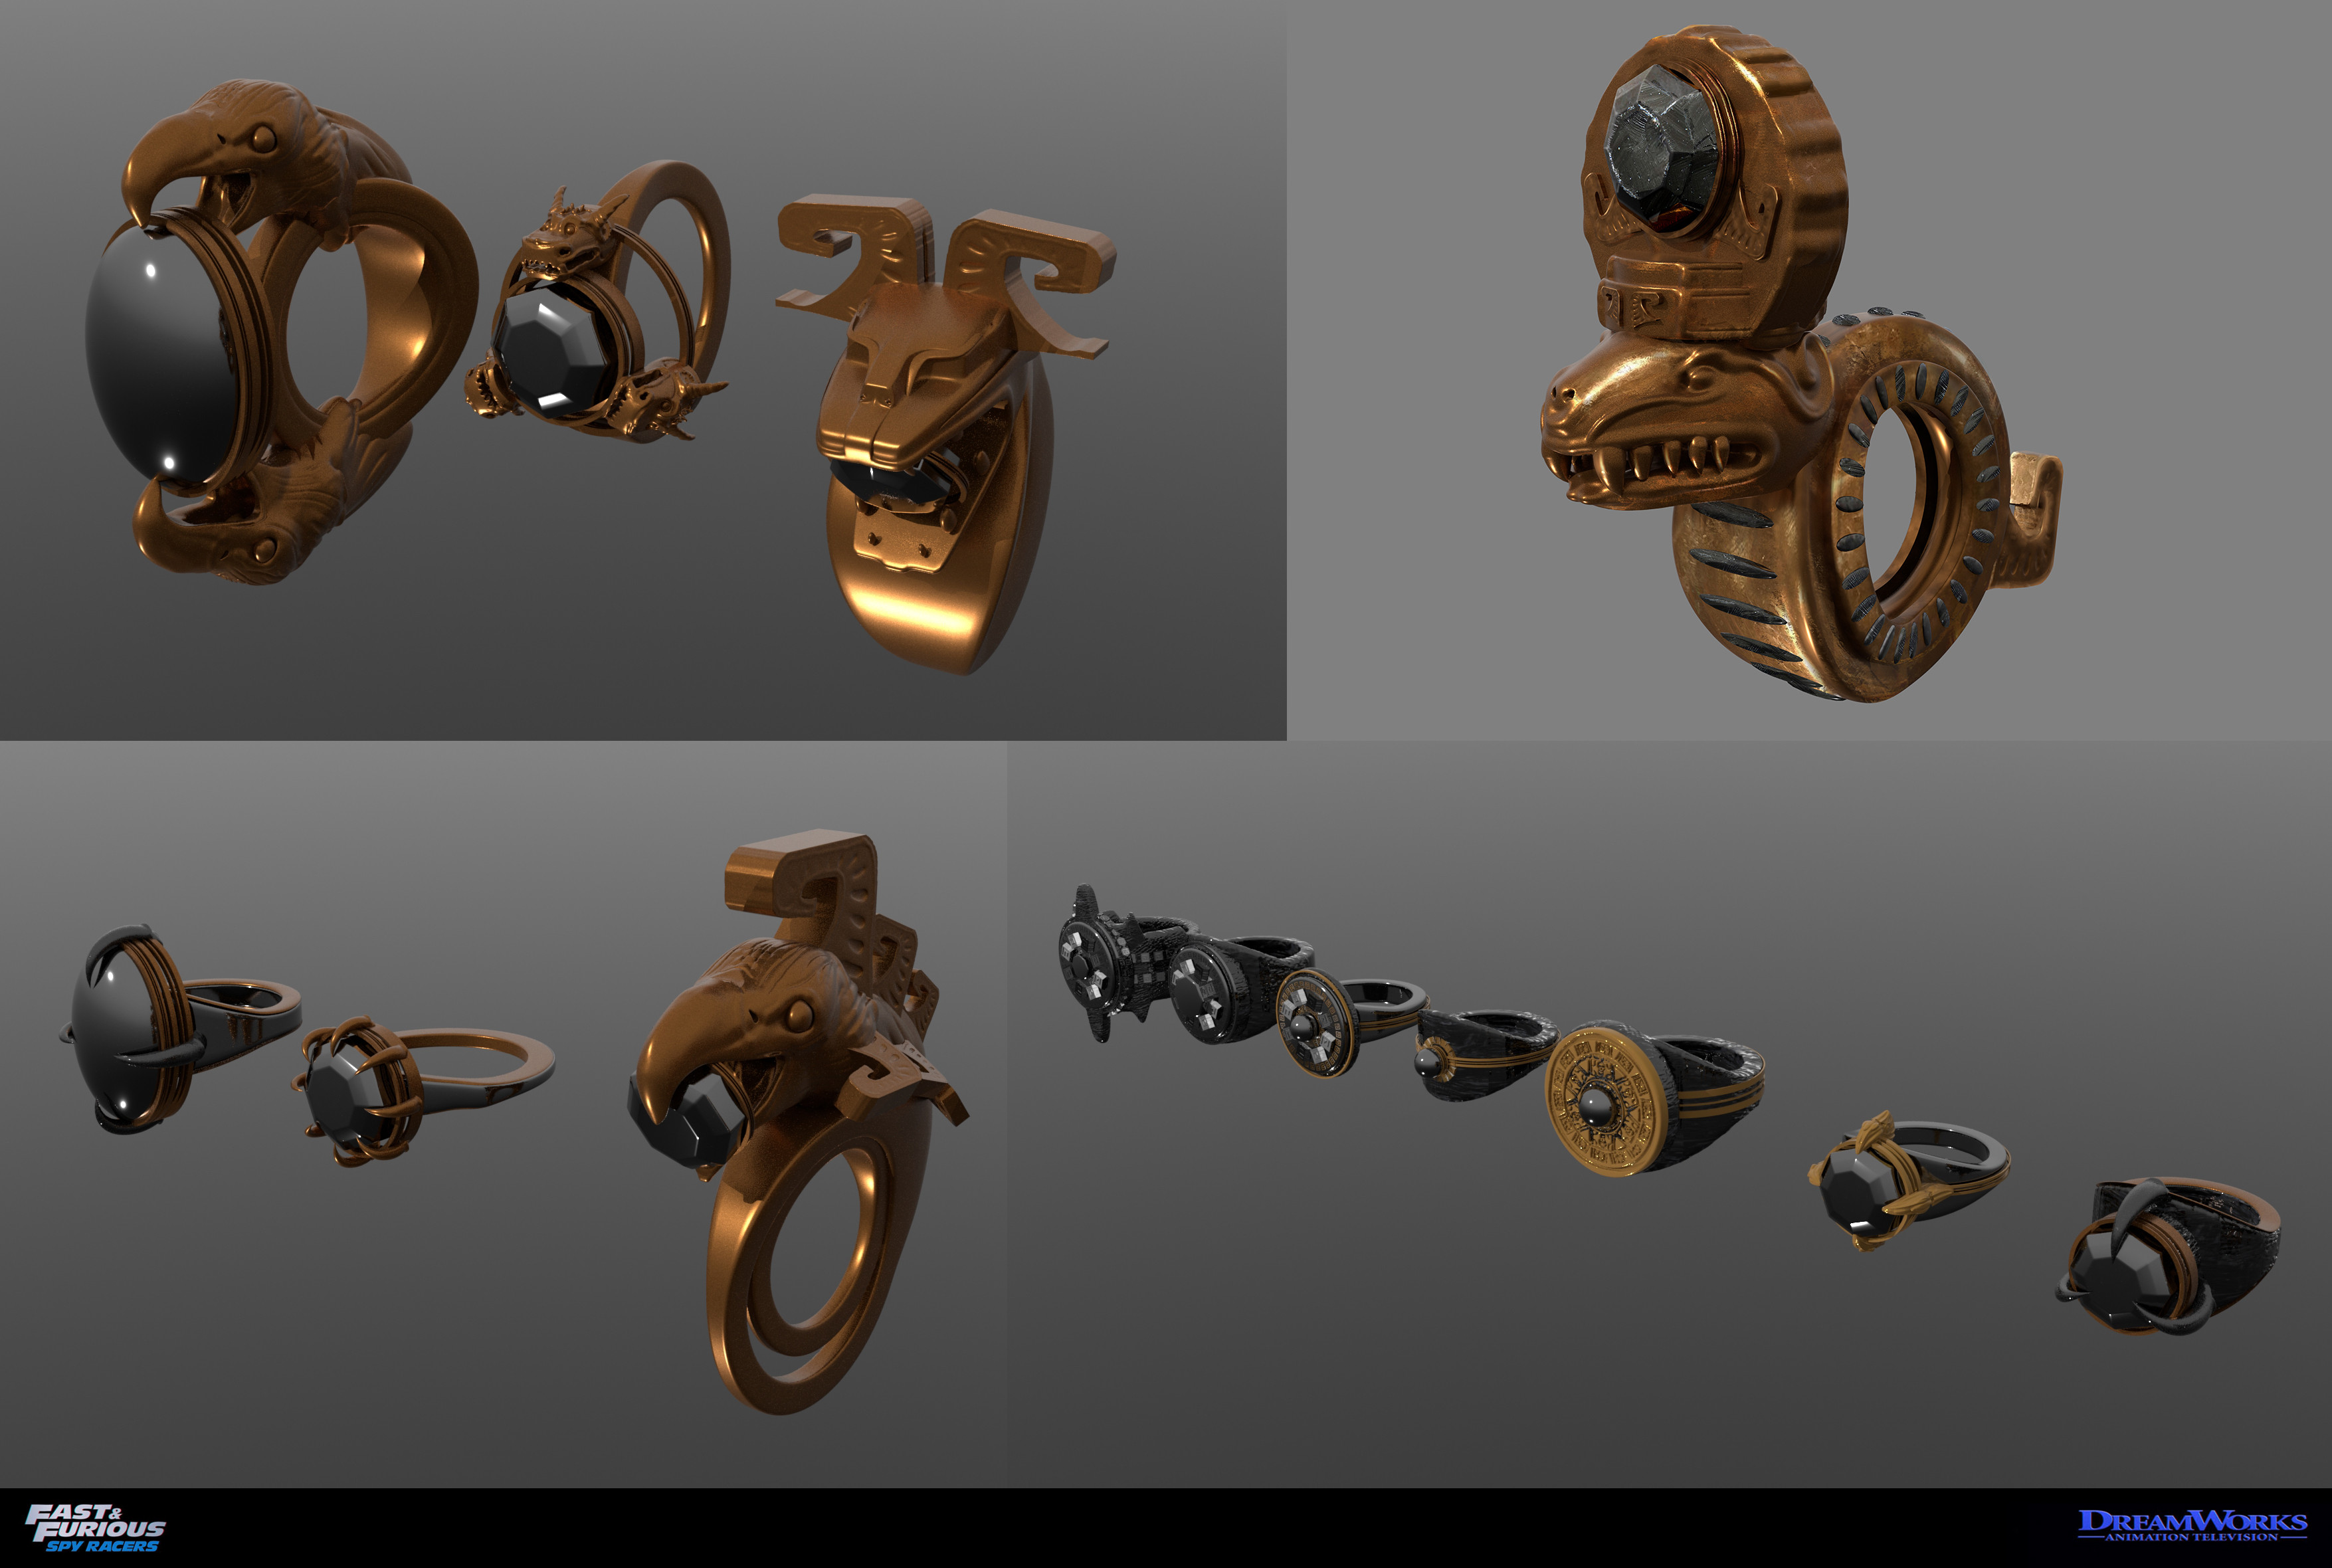 Variations for the Obisian Ring, a central part of the mechanics in the show